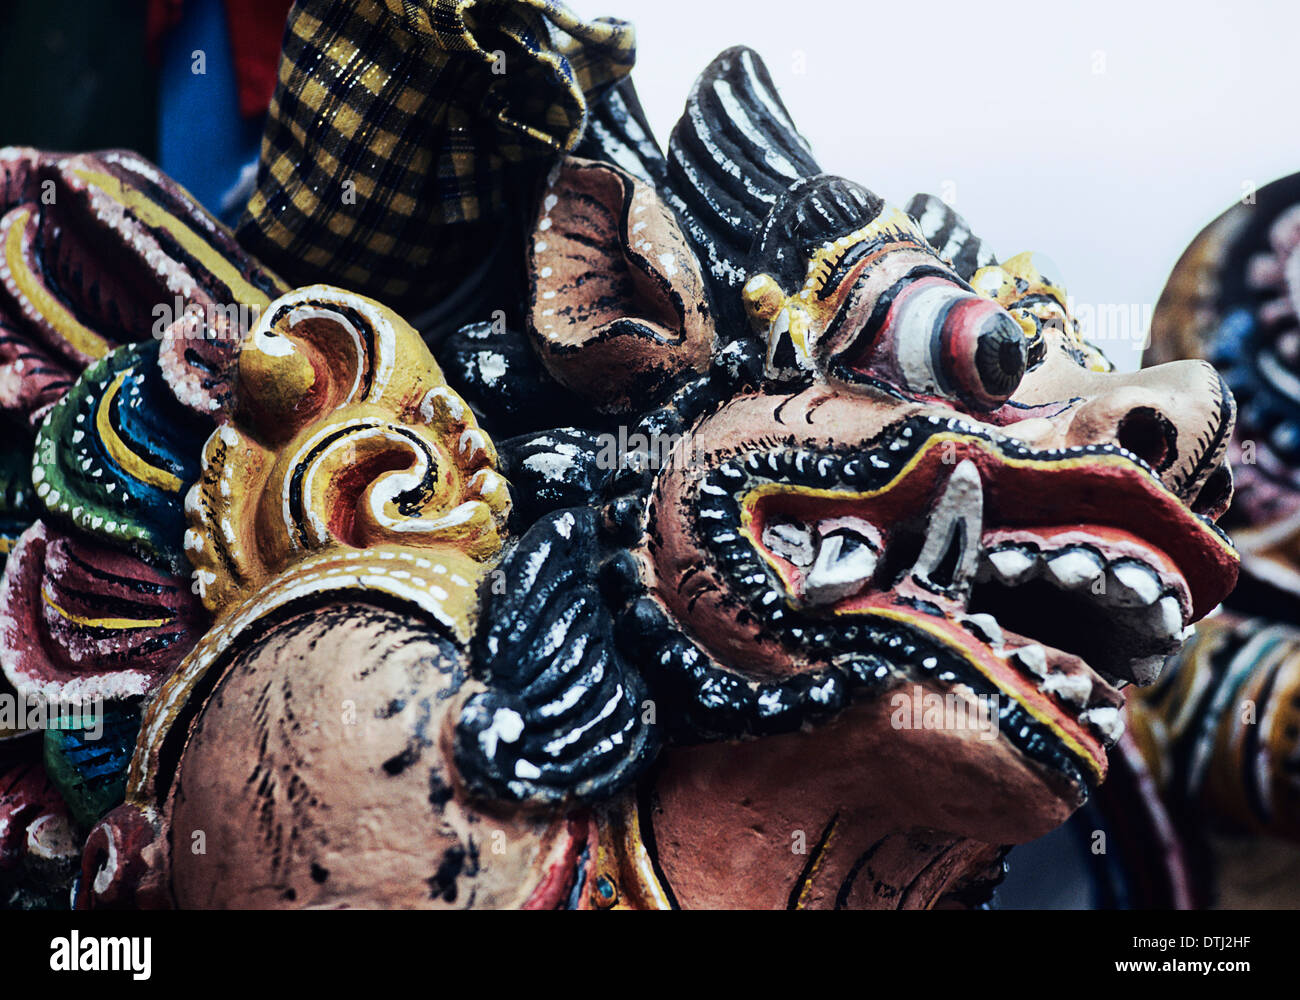 Detail of costume during a performance of a Barong show (Ramayana story, traditional dances and music), Bali, Indonesia Stock Photo